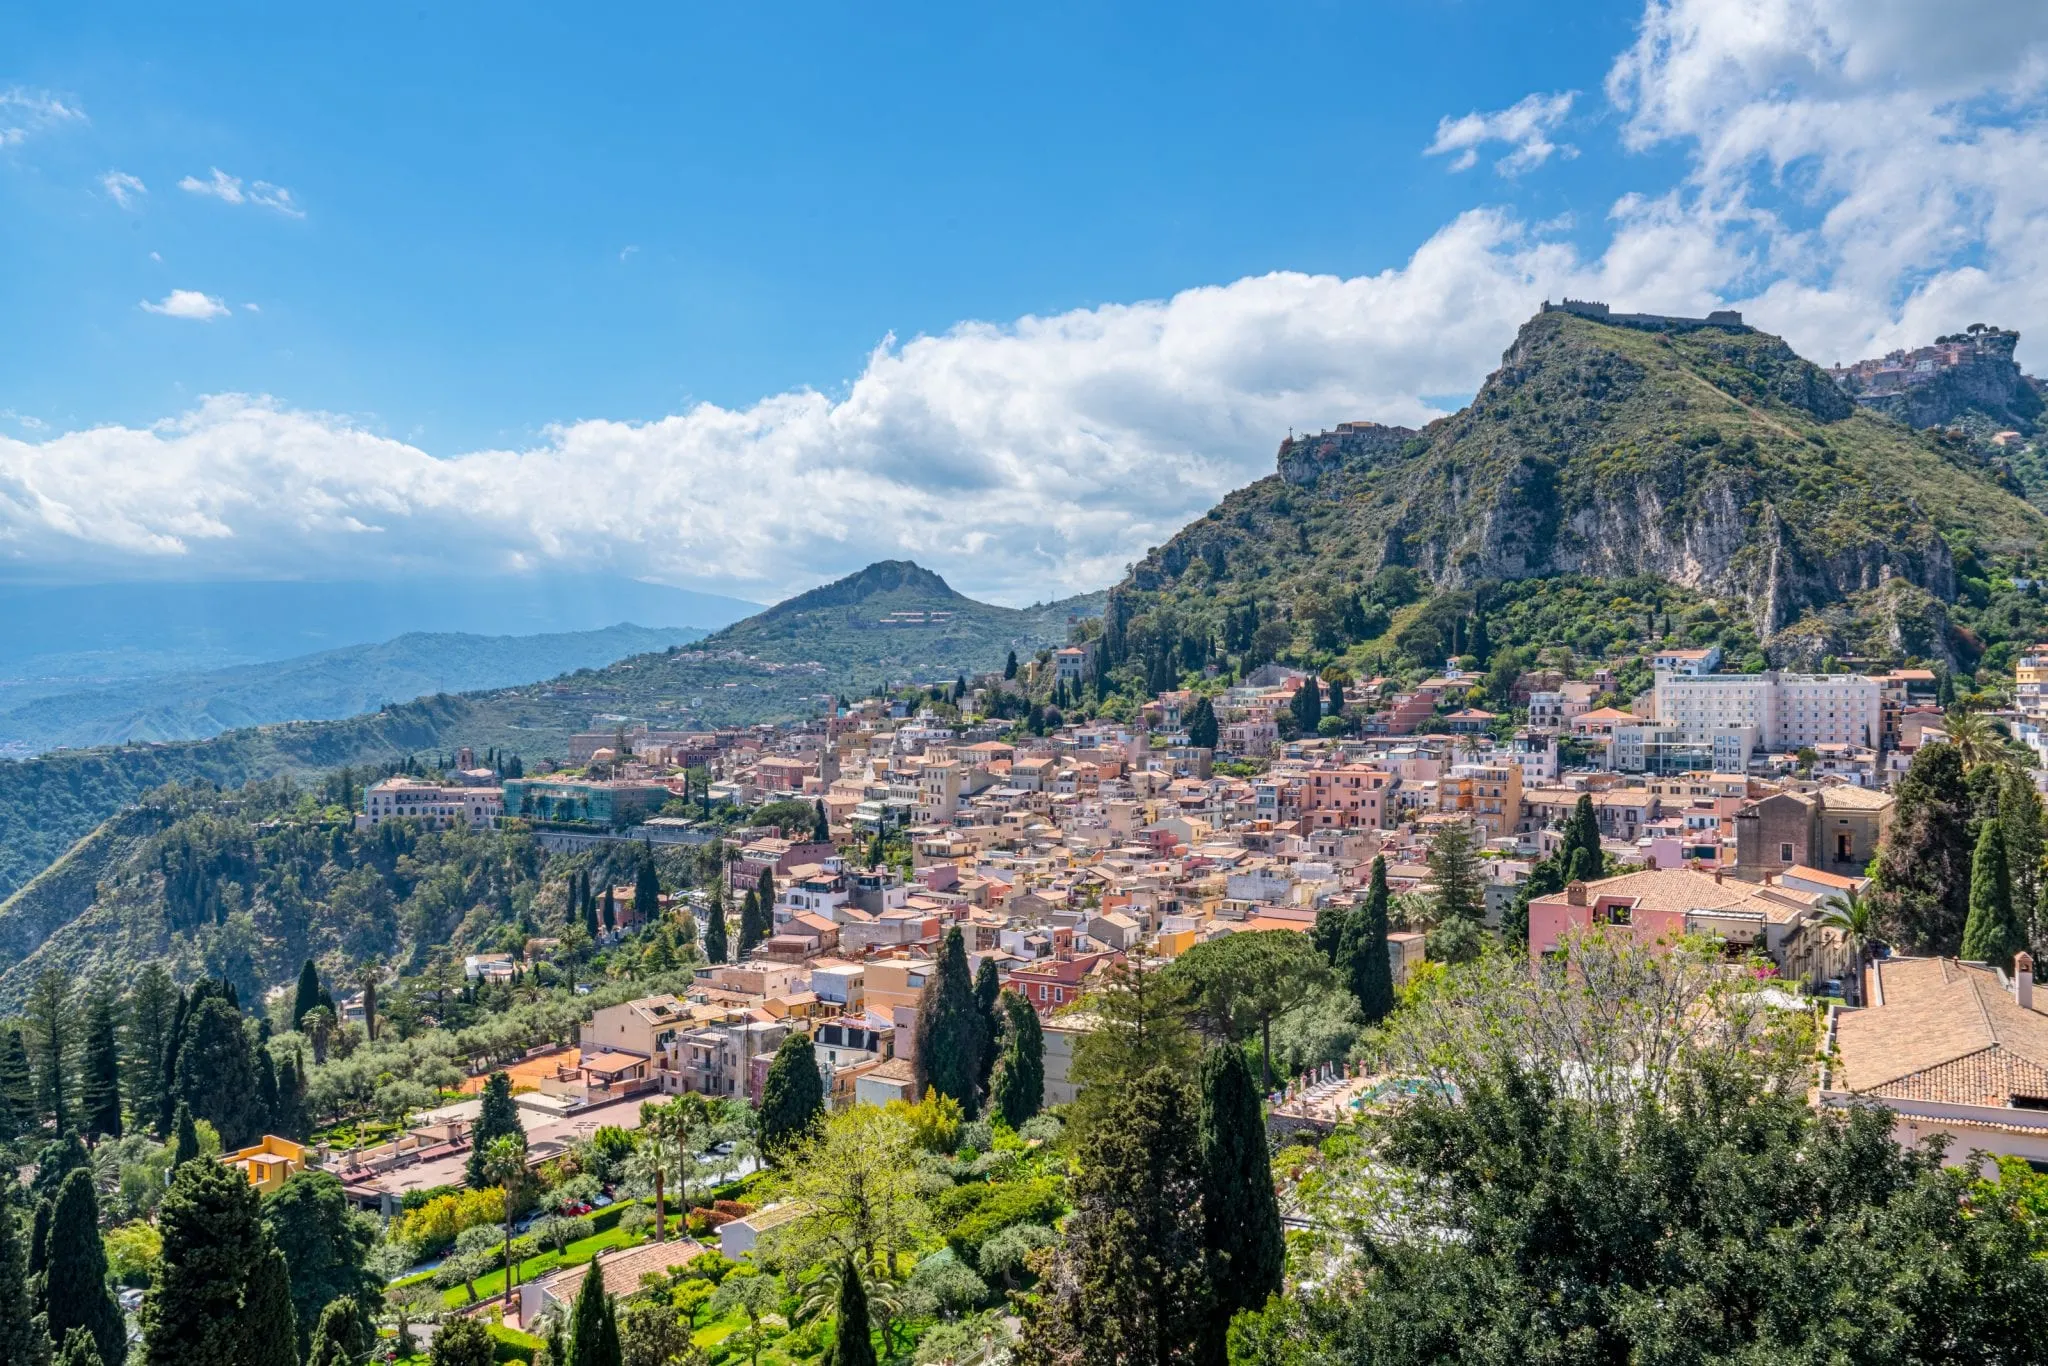 View of Taormina as seen from grounds of the Greek theatre. You can see the bottom of Mount Etna, the peak is covered by clouds.